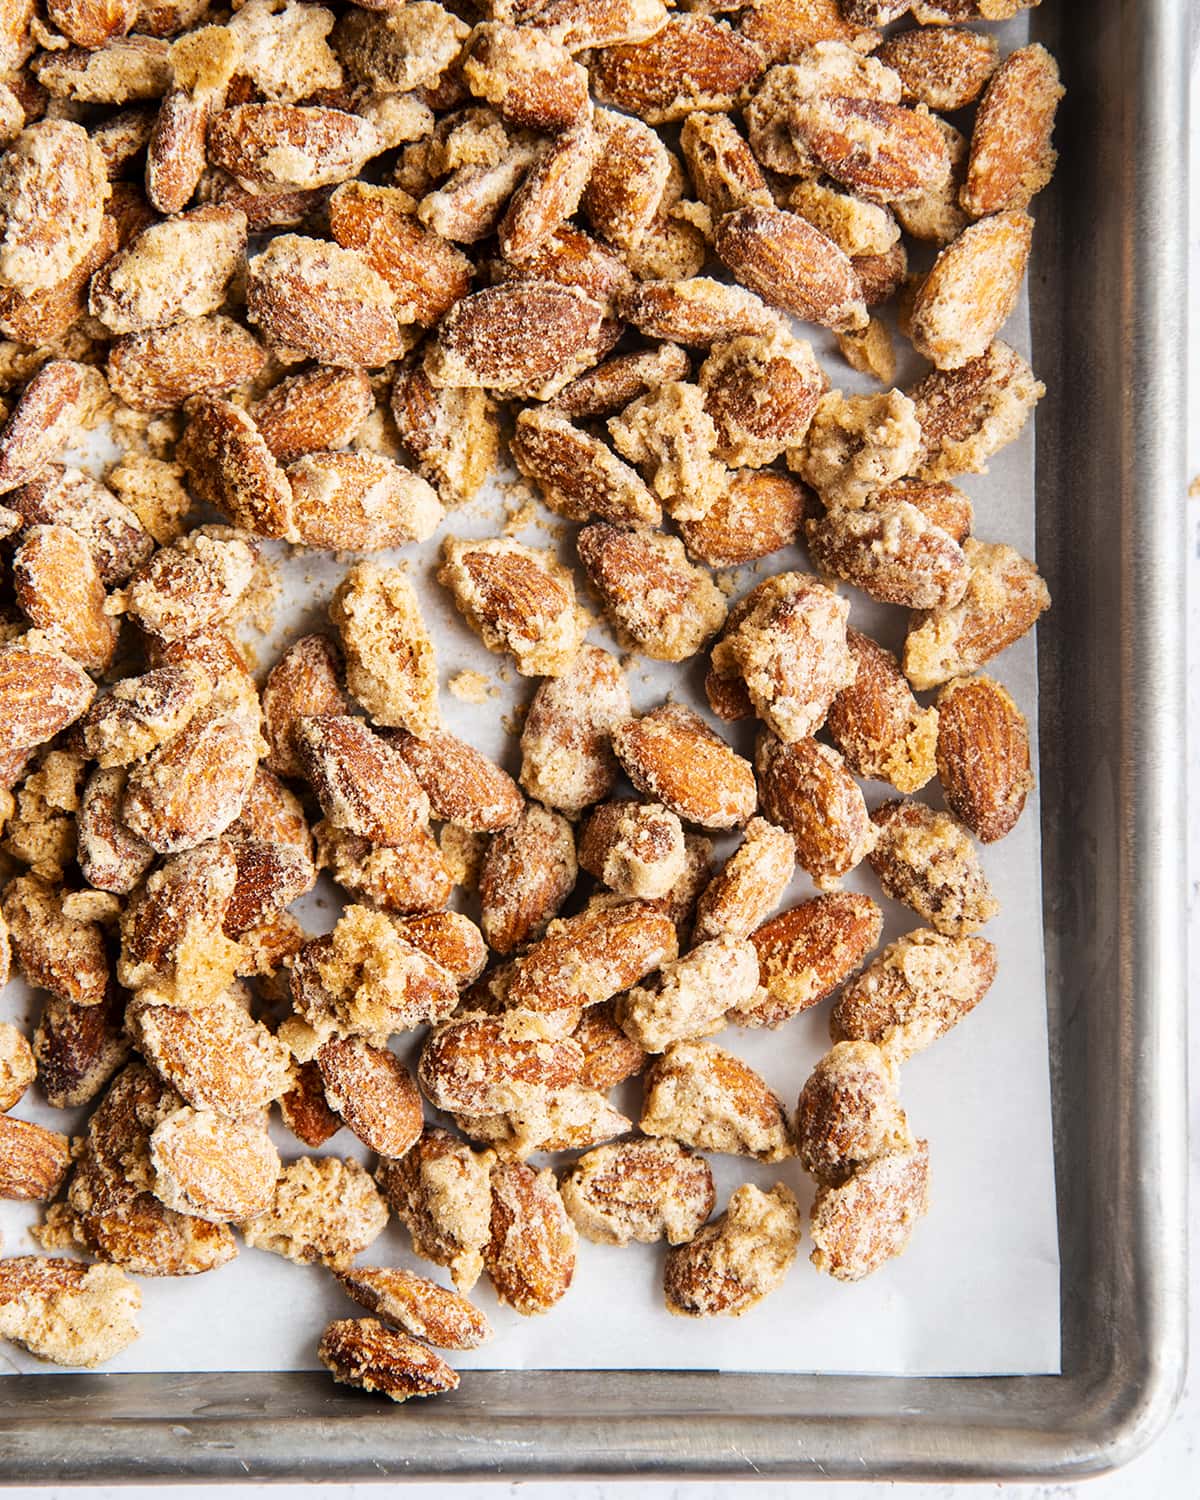 An overhead photo of cinnamon sugar candied almonds on a baking pan.